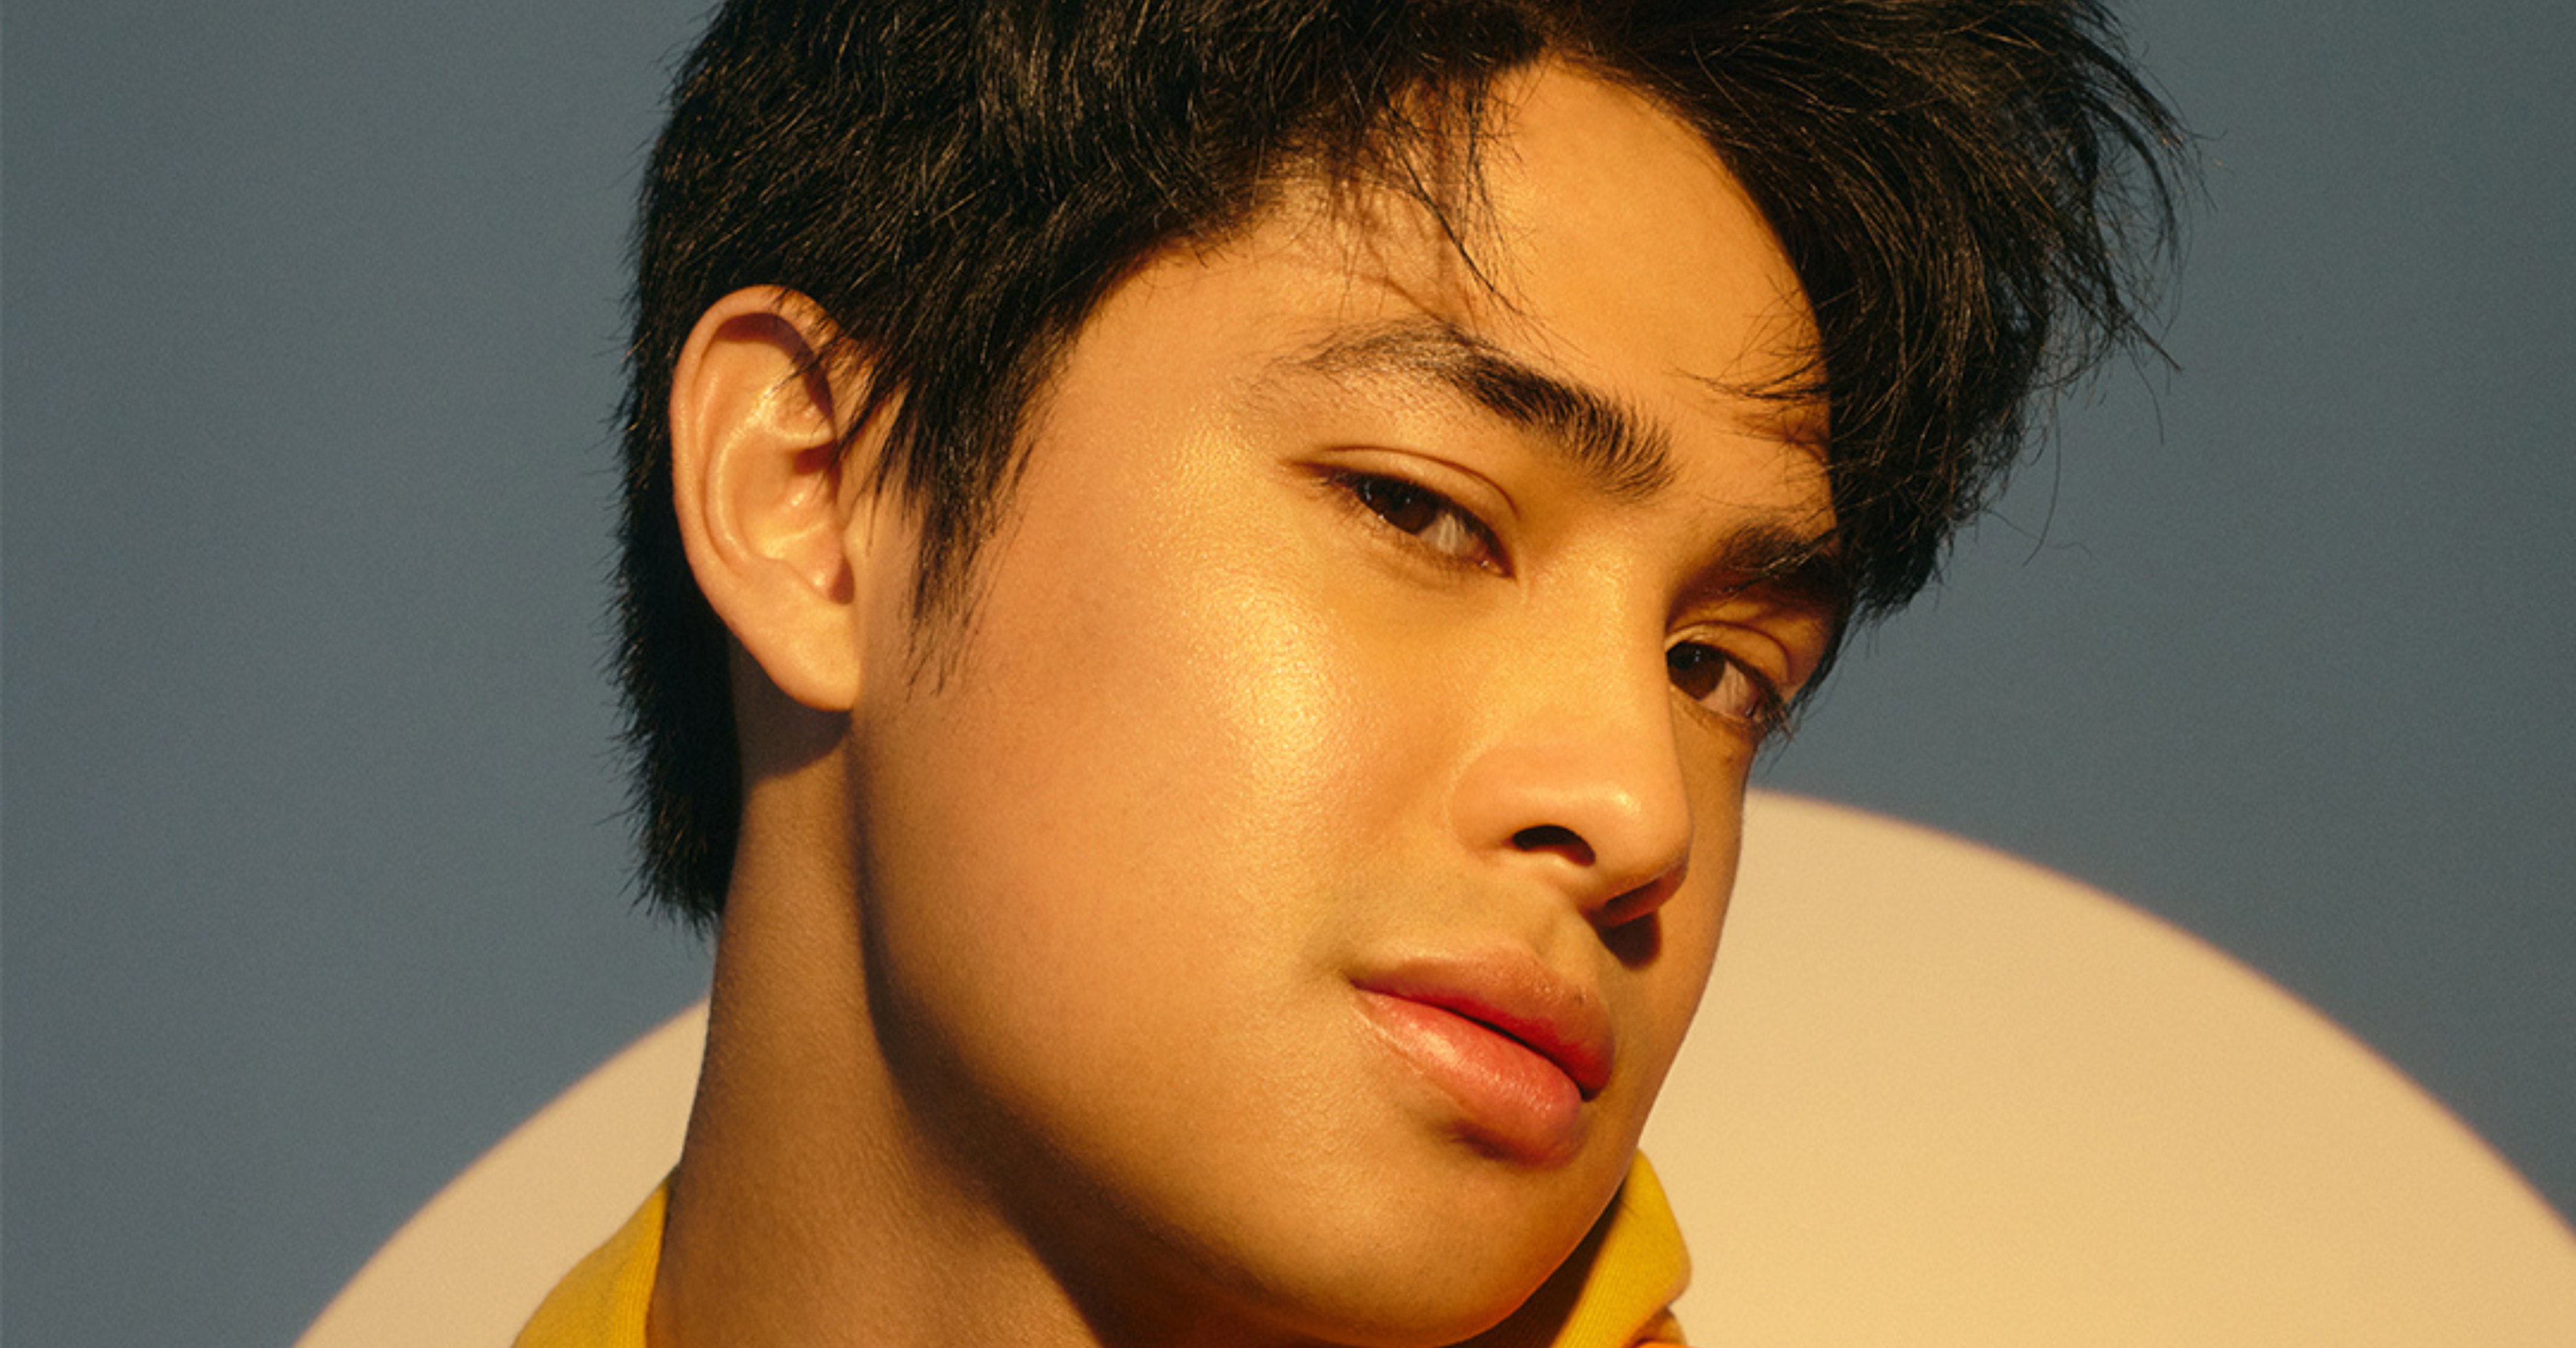 Time for ‘Prejuvenation’: Belo Medical Group and Donny Pangilinan Introduce ADVALight for the Young and Restless